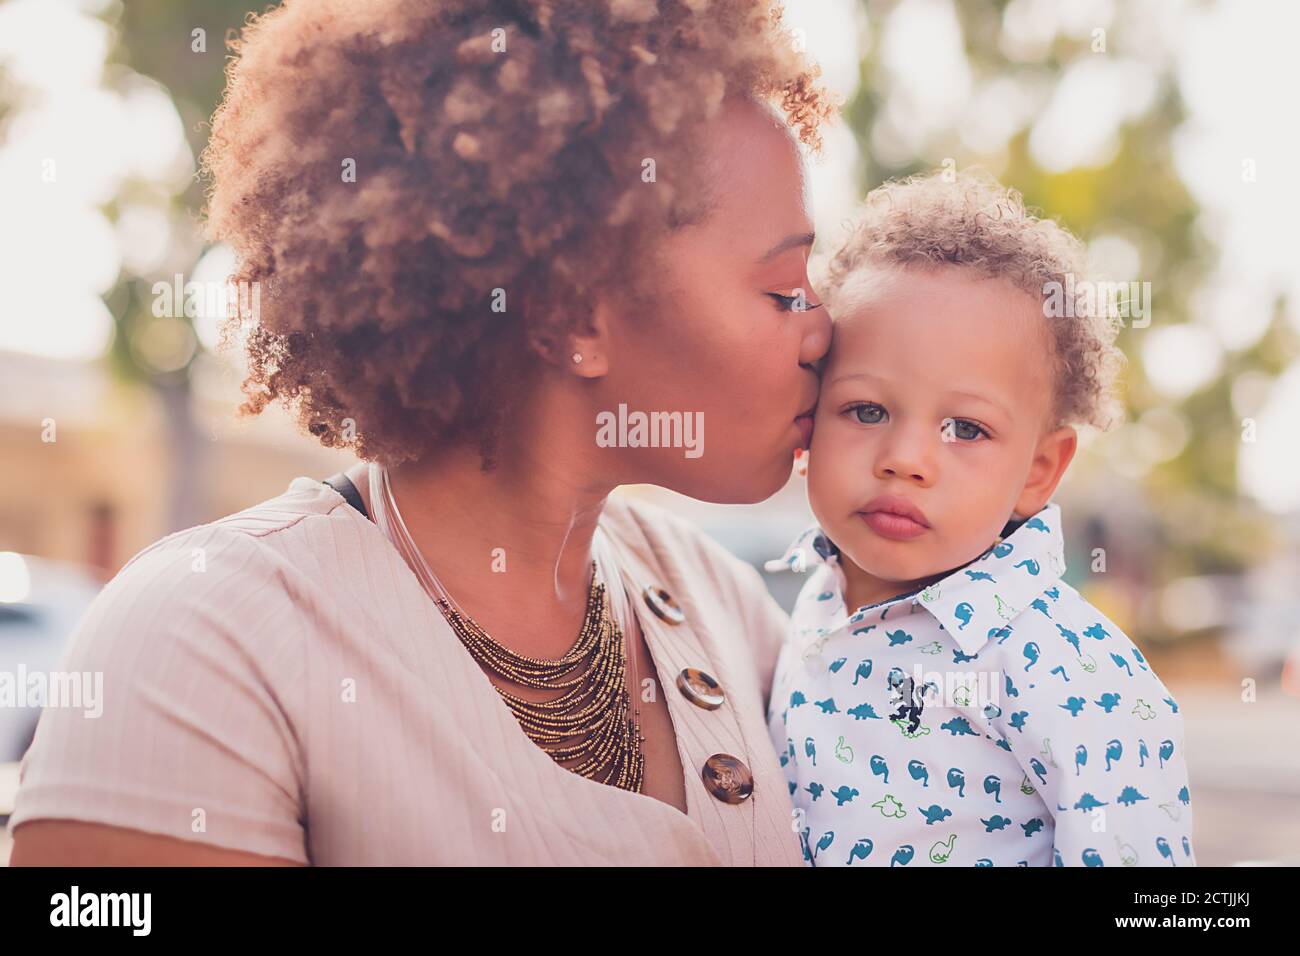 Mom holding and kissing her baby boy, baby looking at camera Stock Photo